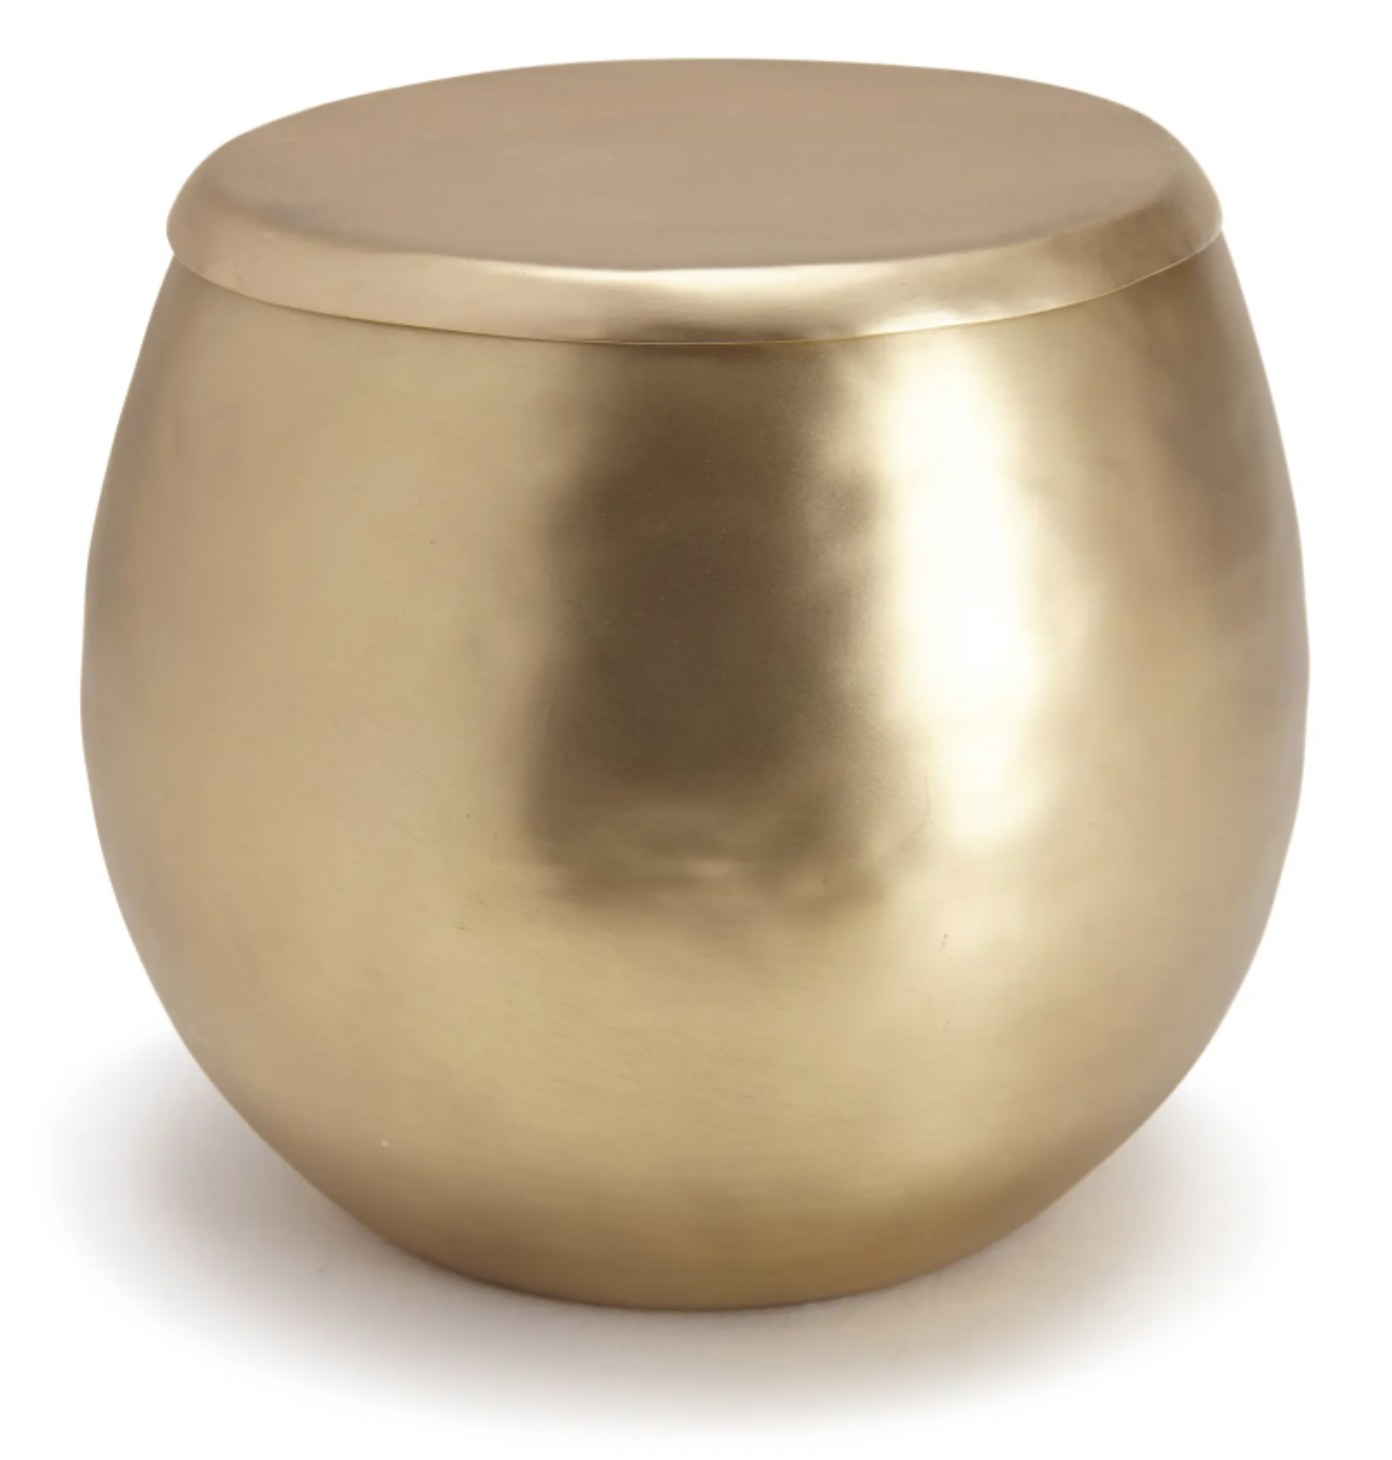 a spherical brass cotton jar with a lid on top